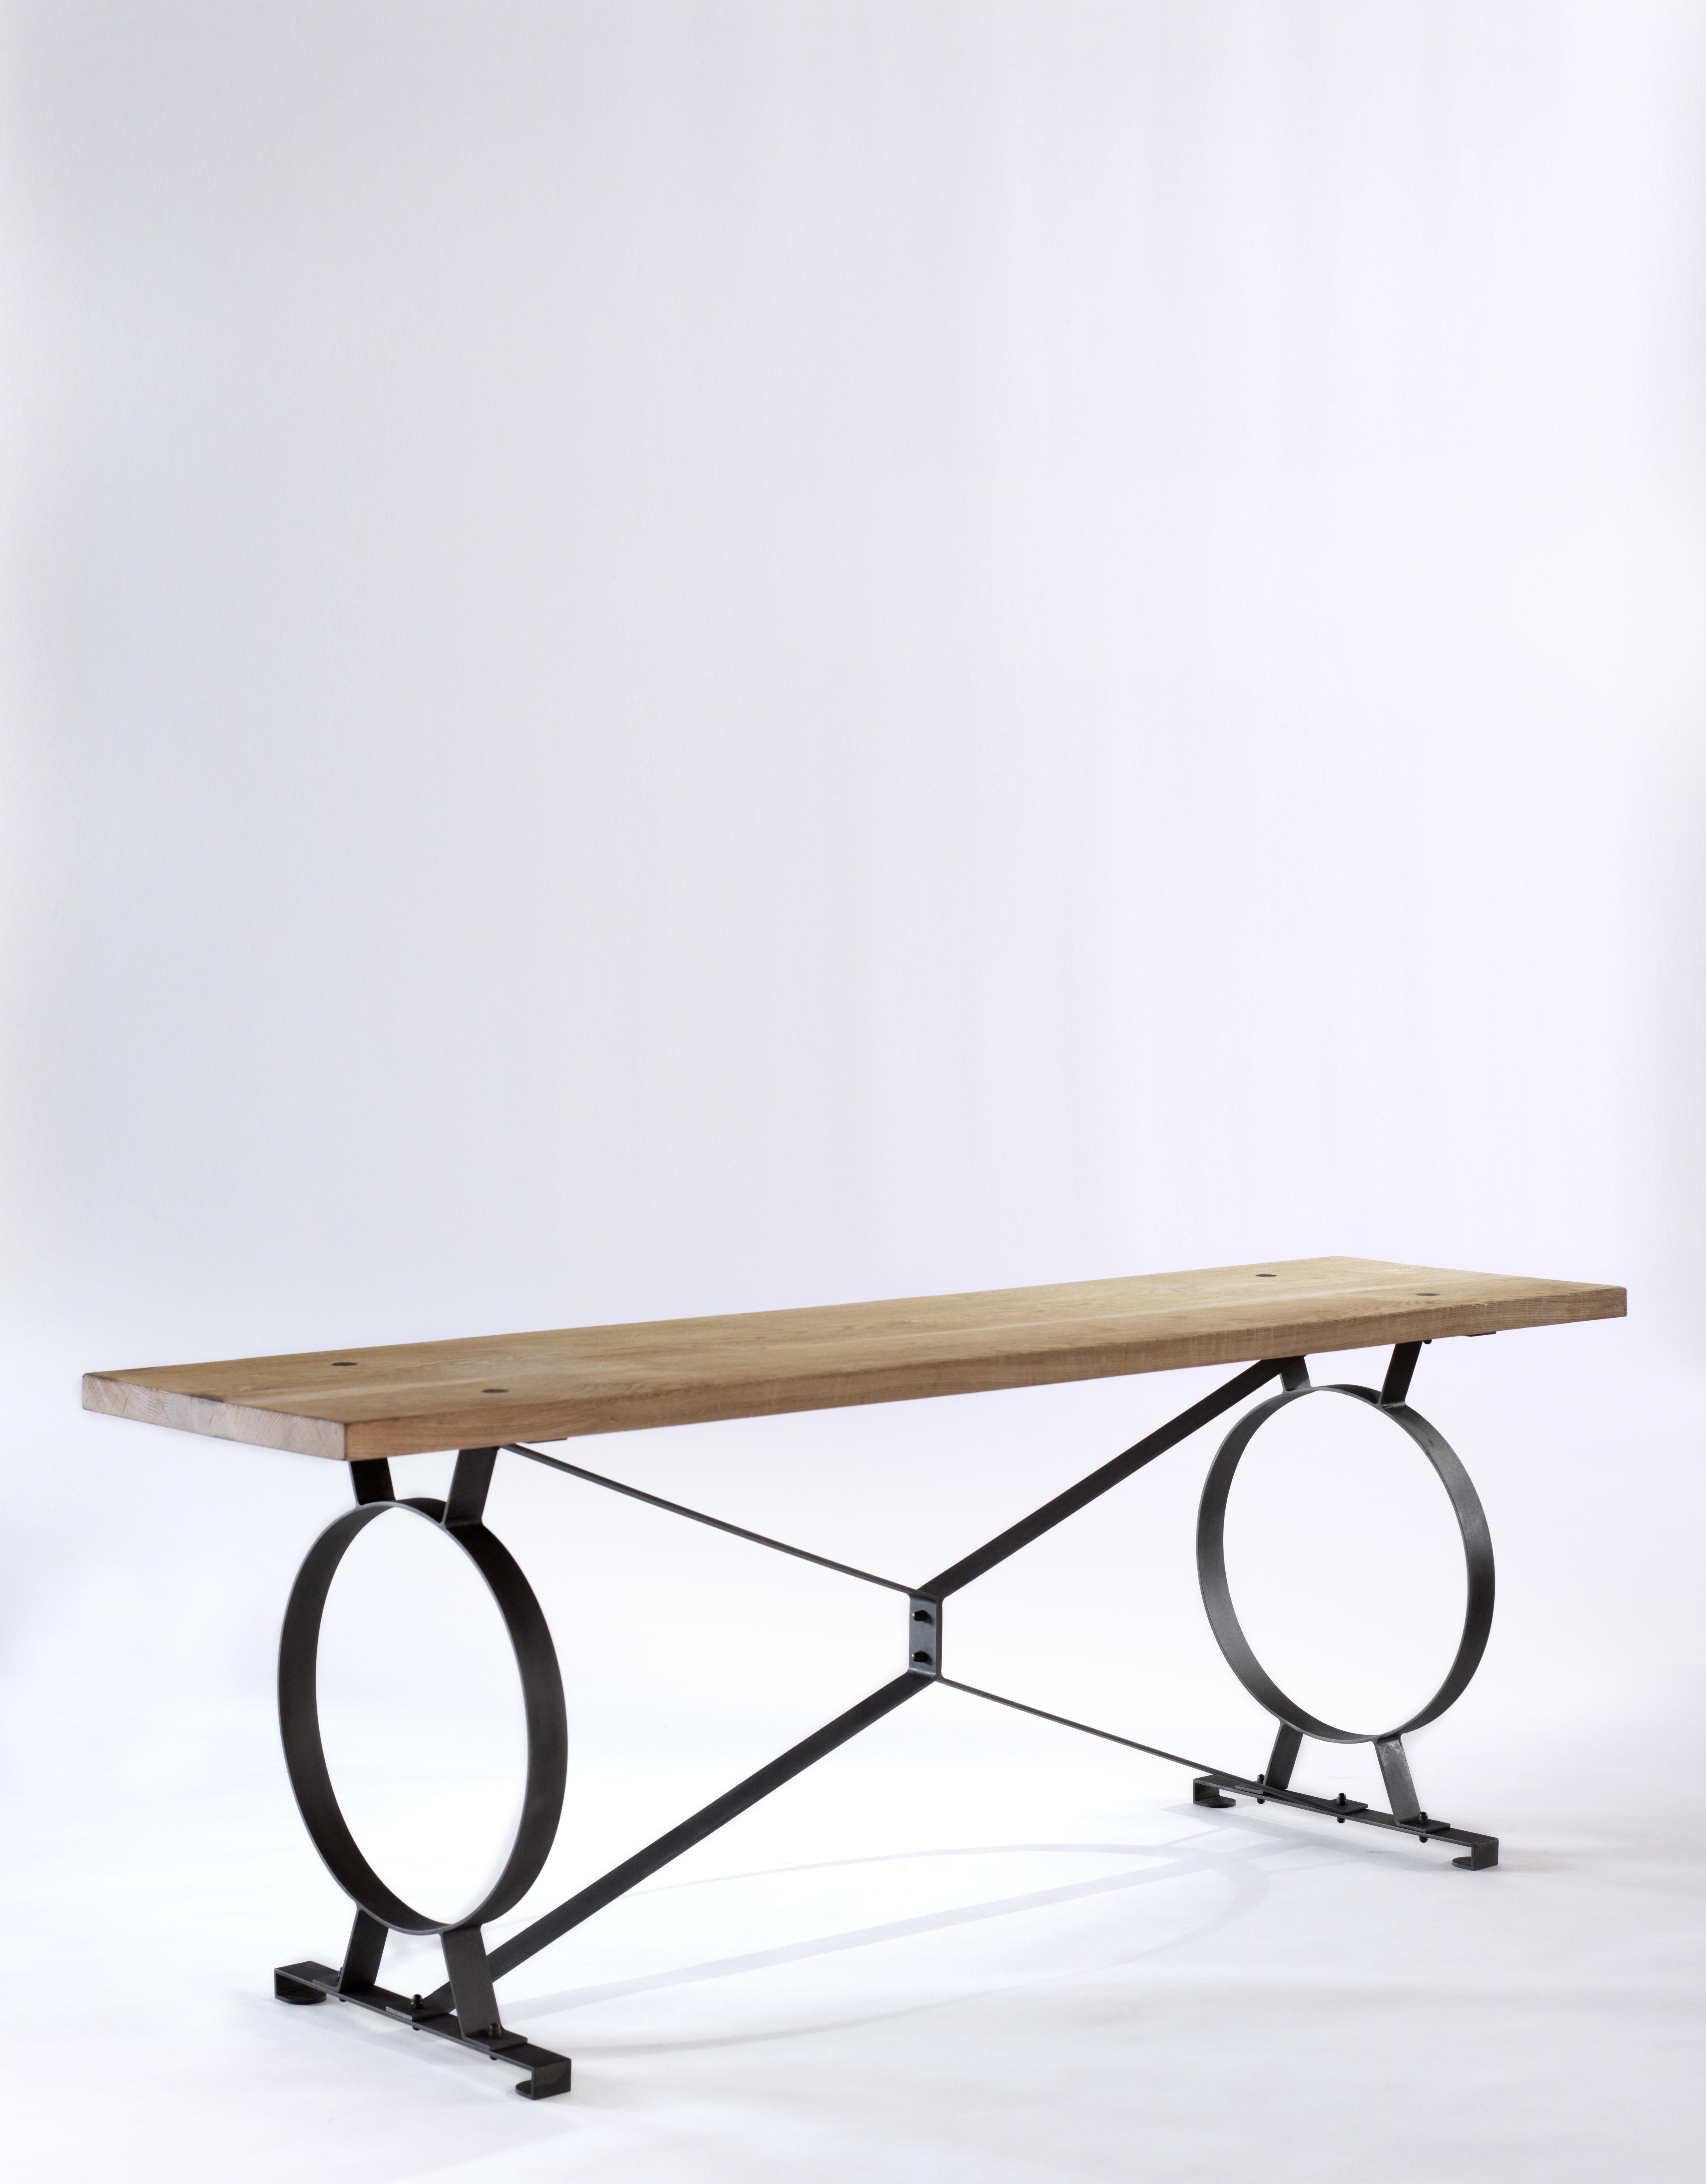 A raw oak and ebonized steel sofa table
B.B. - Inspired by Etruscan designs, it can be used either behind a sofa or as a great object table against the wall. Its construction allows for a rather satisfying springiness. I love the rebated steel